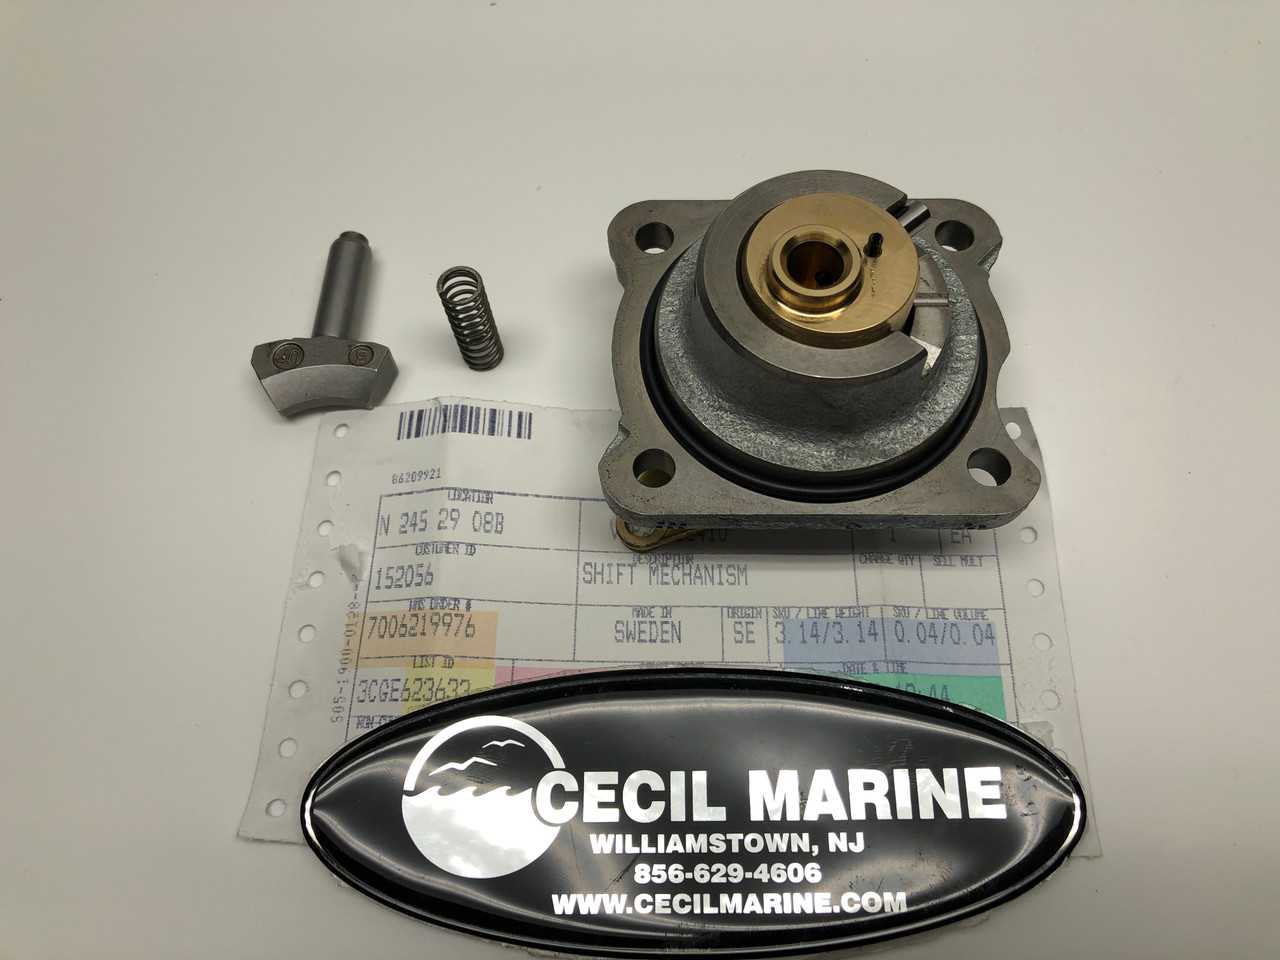 $529.99* GENUINE VOLVO no tax* SHIFT MECHANISM 21256410 *In Stock & Ready To Ship!